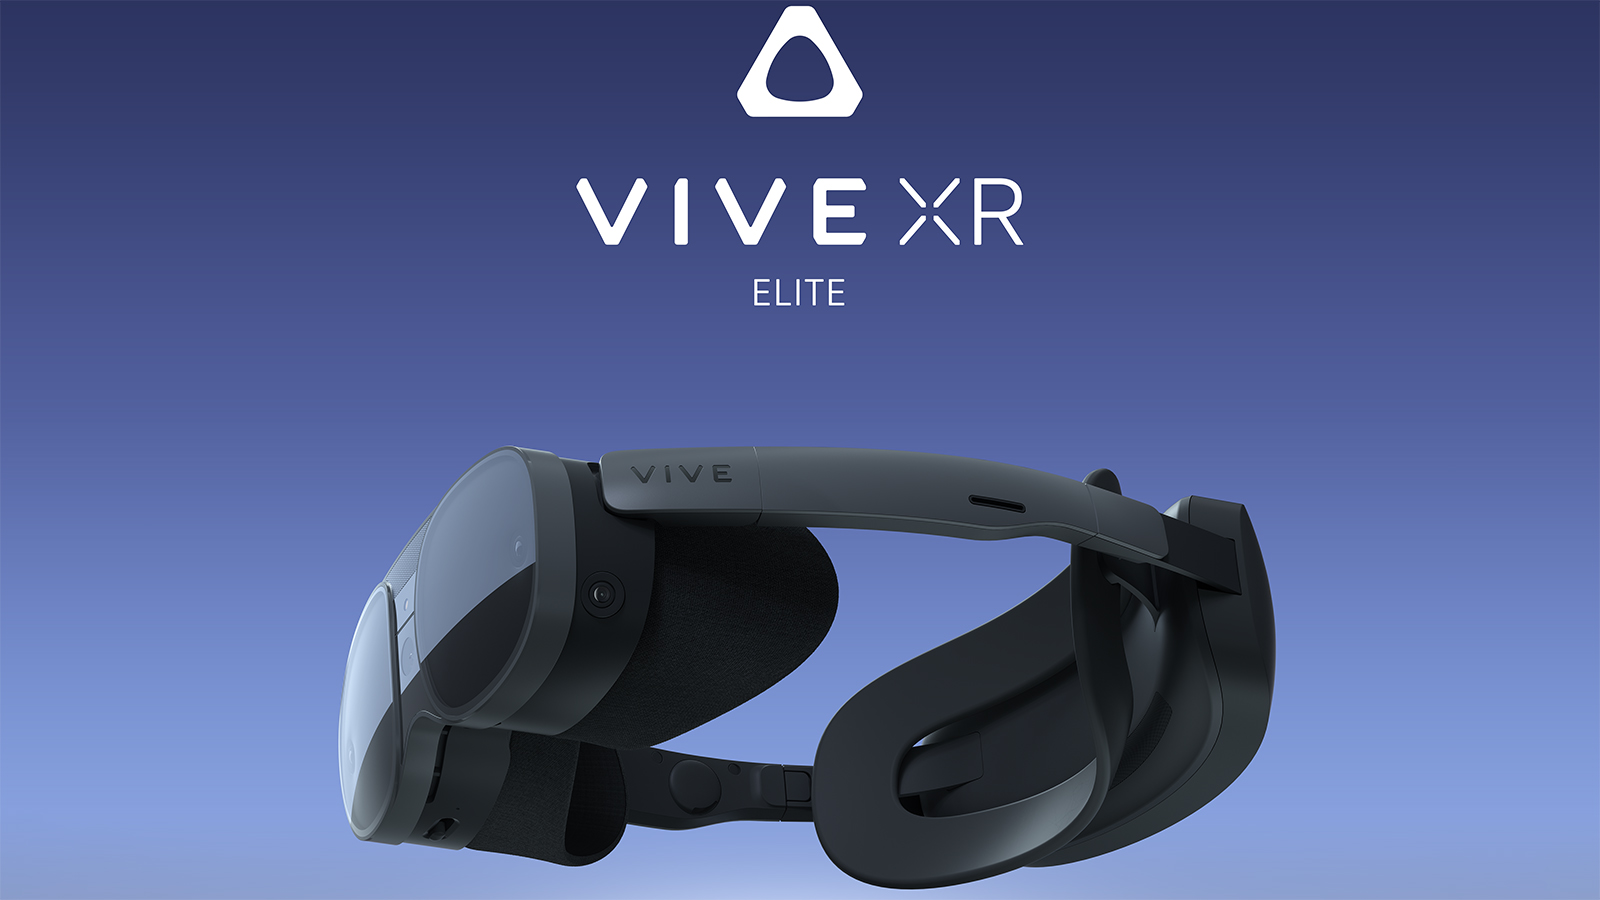 HTC’s VIVE XR Elite headset with its battery attached